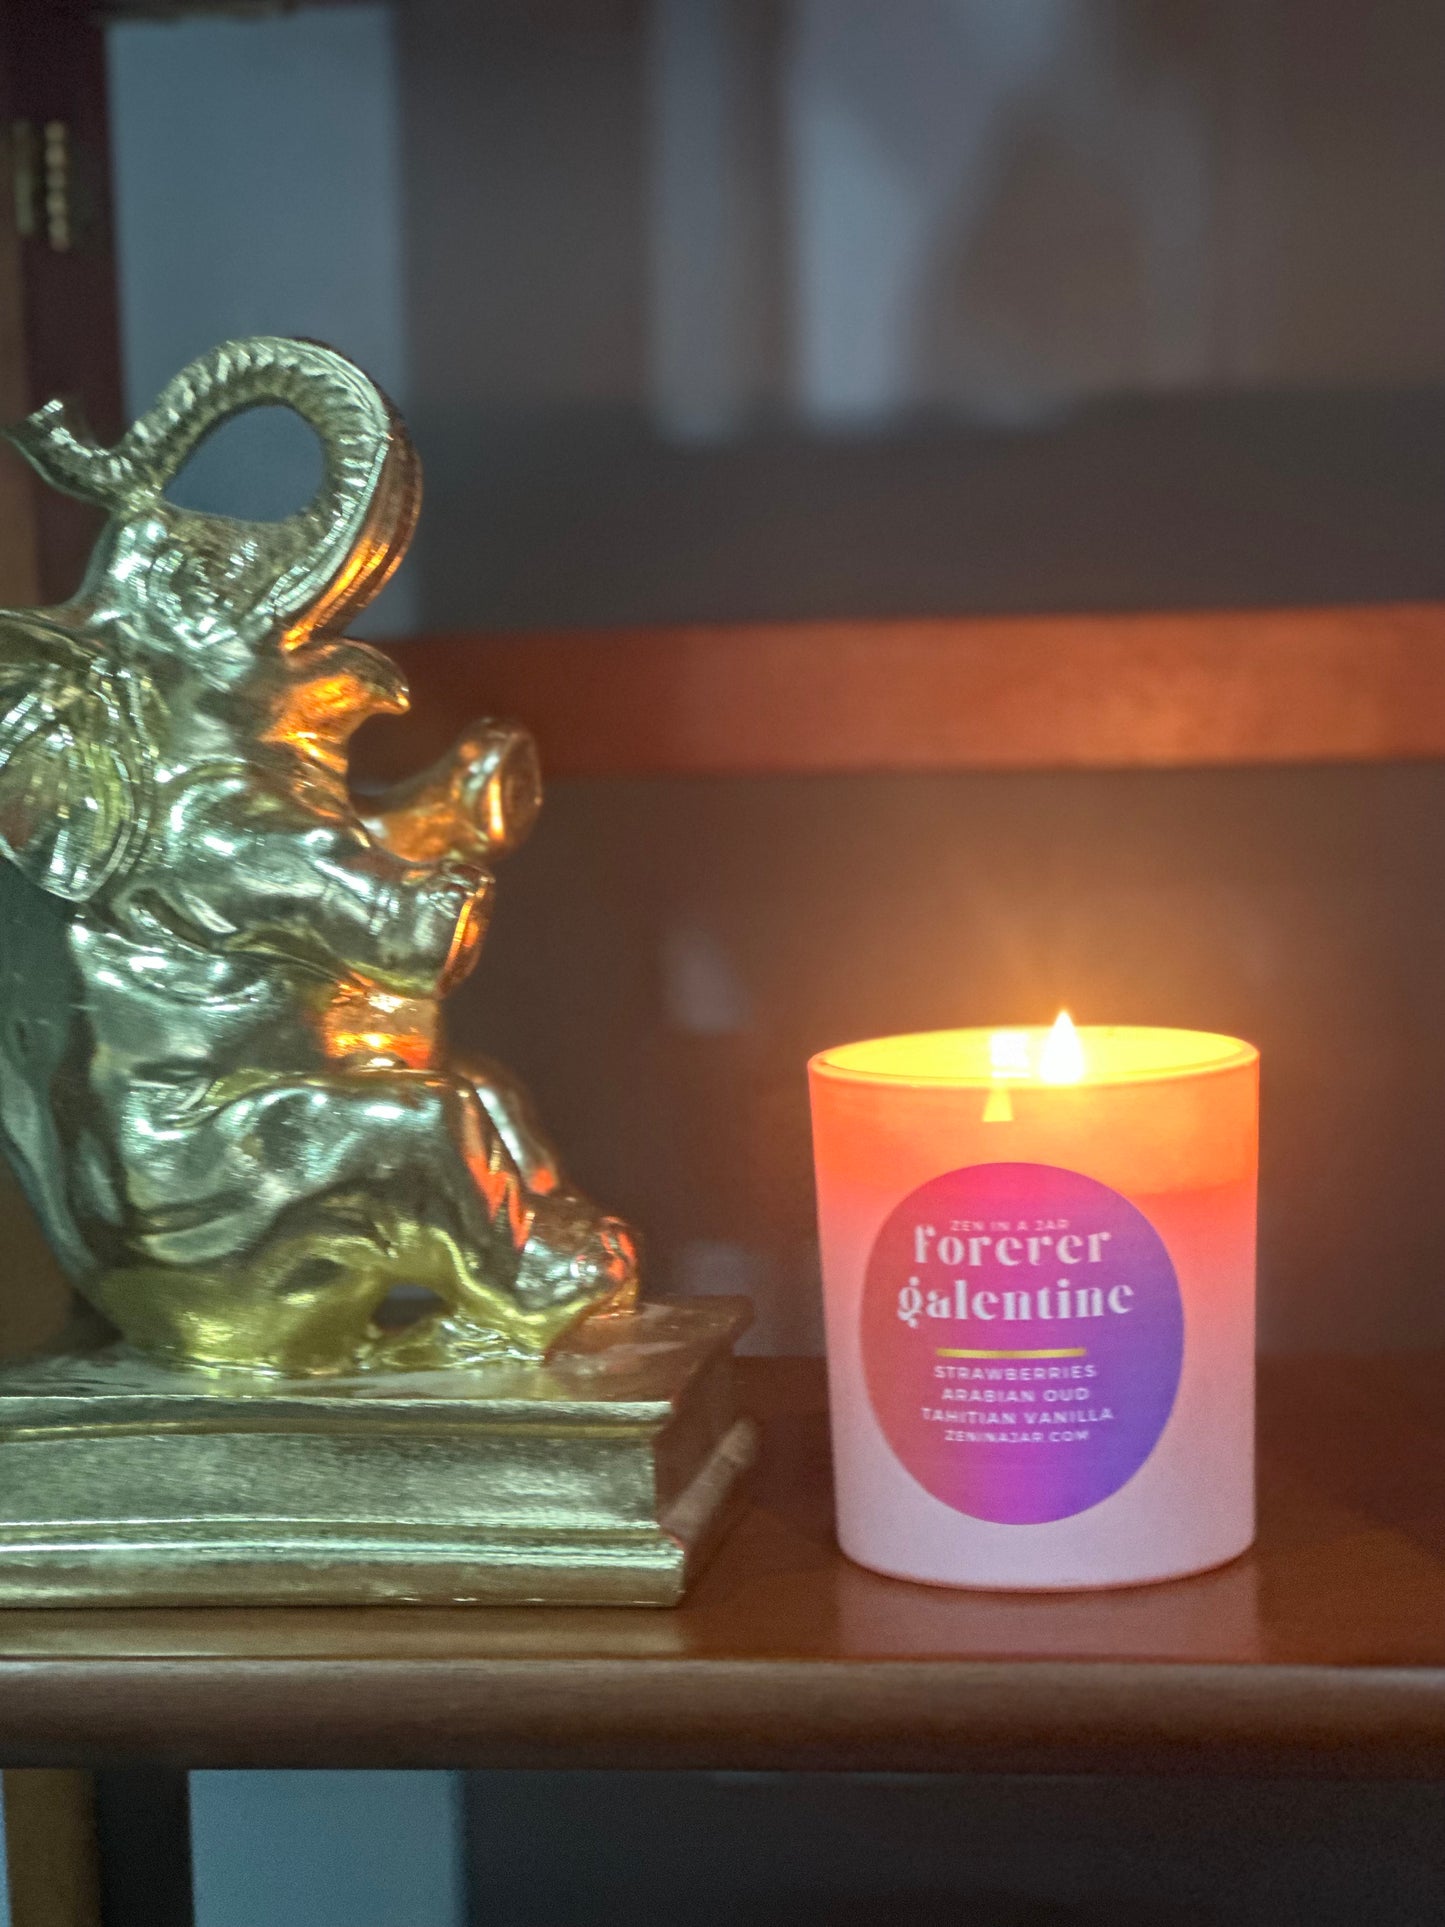 FOREVER GALENTINE CANDLE